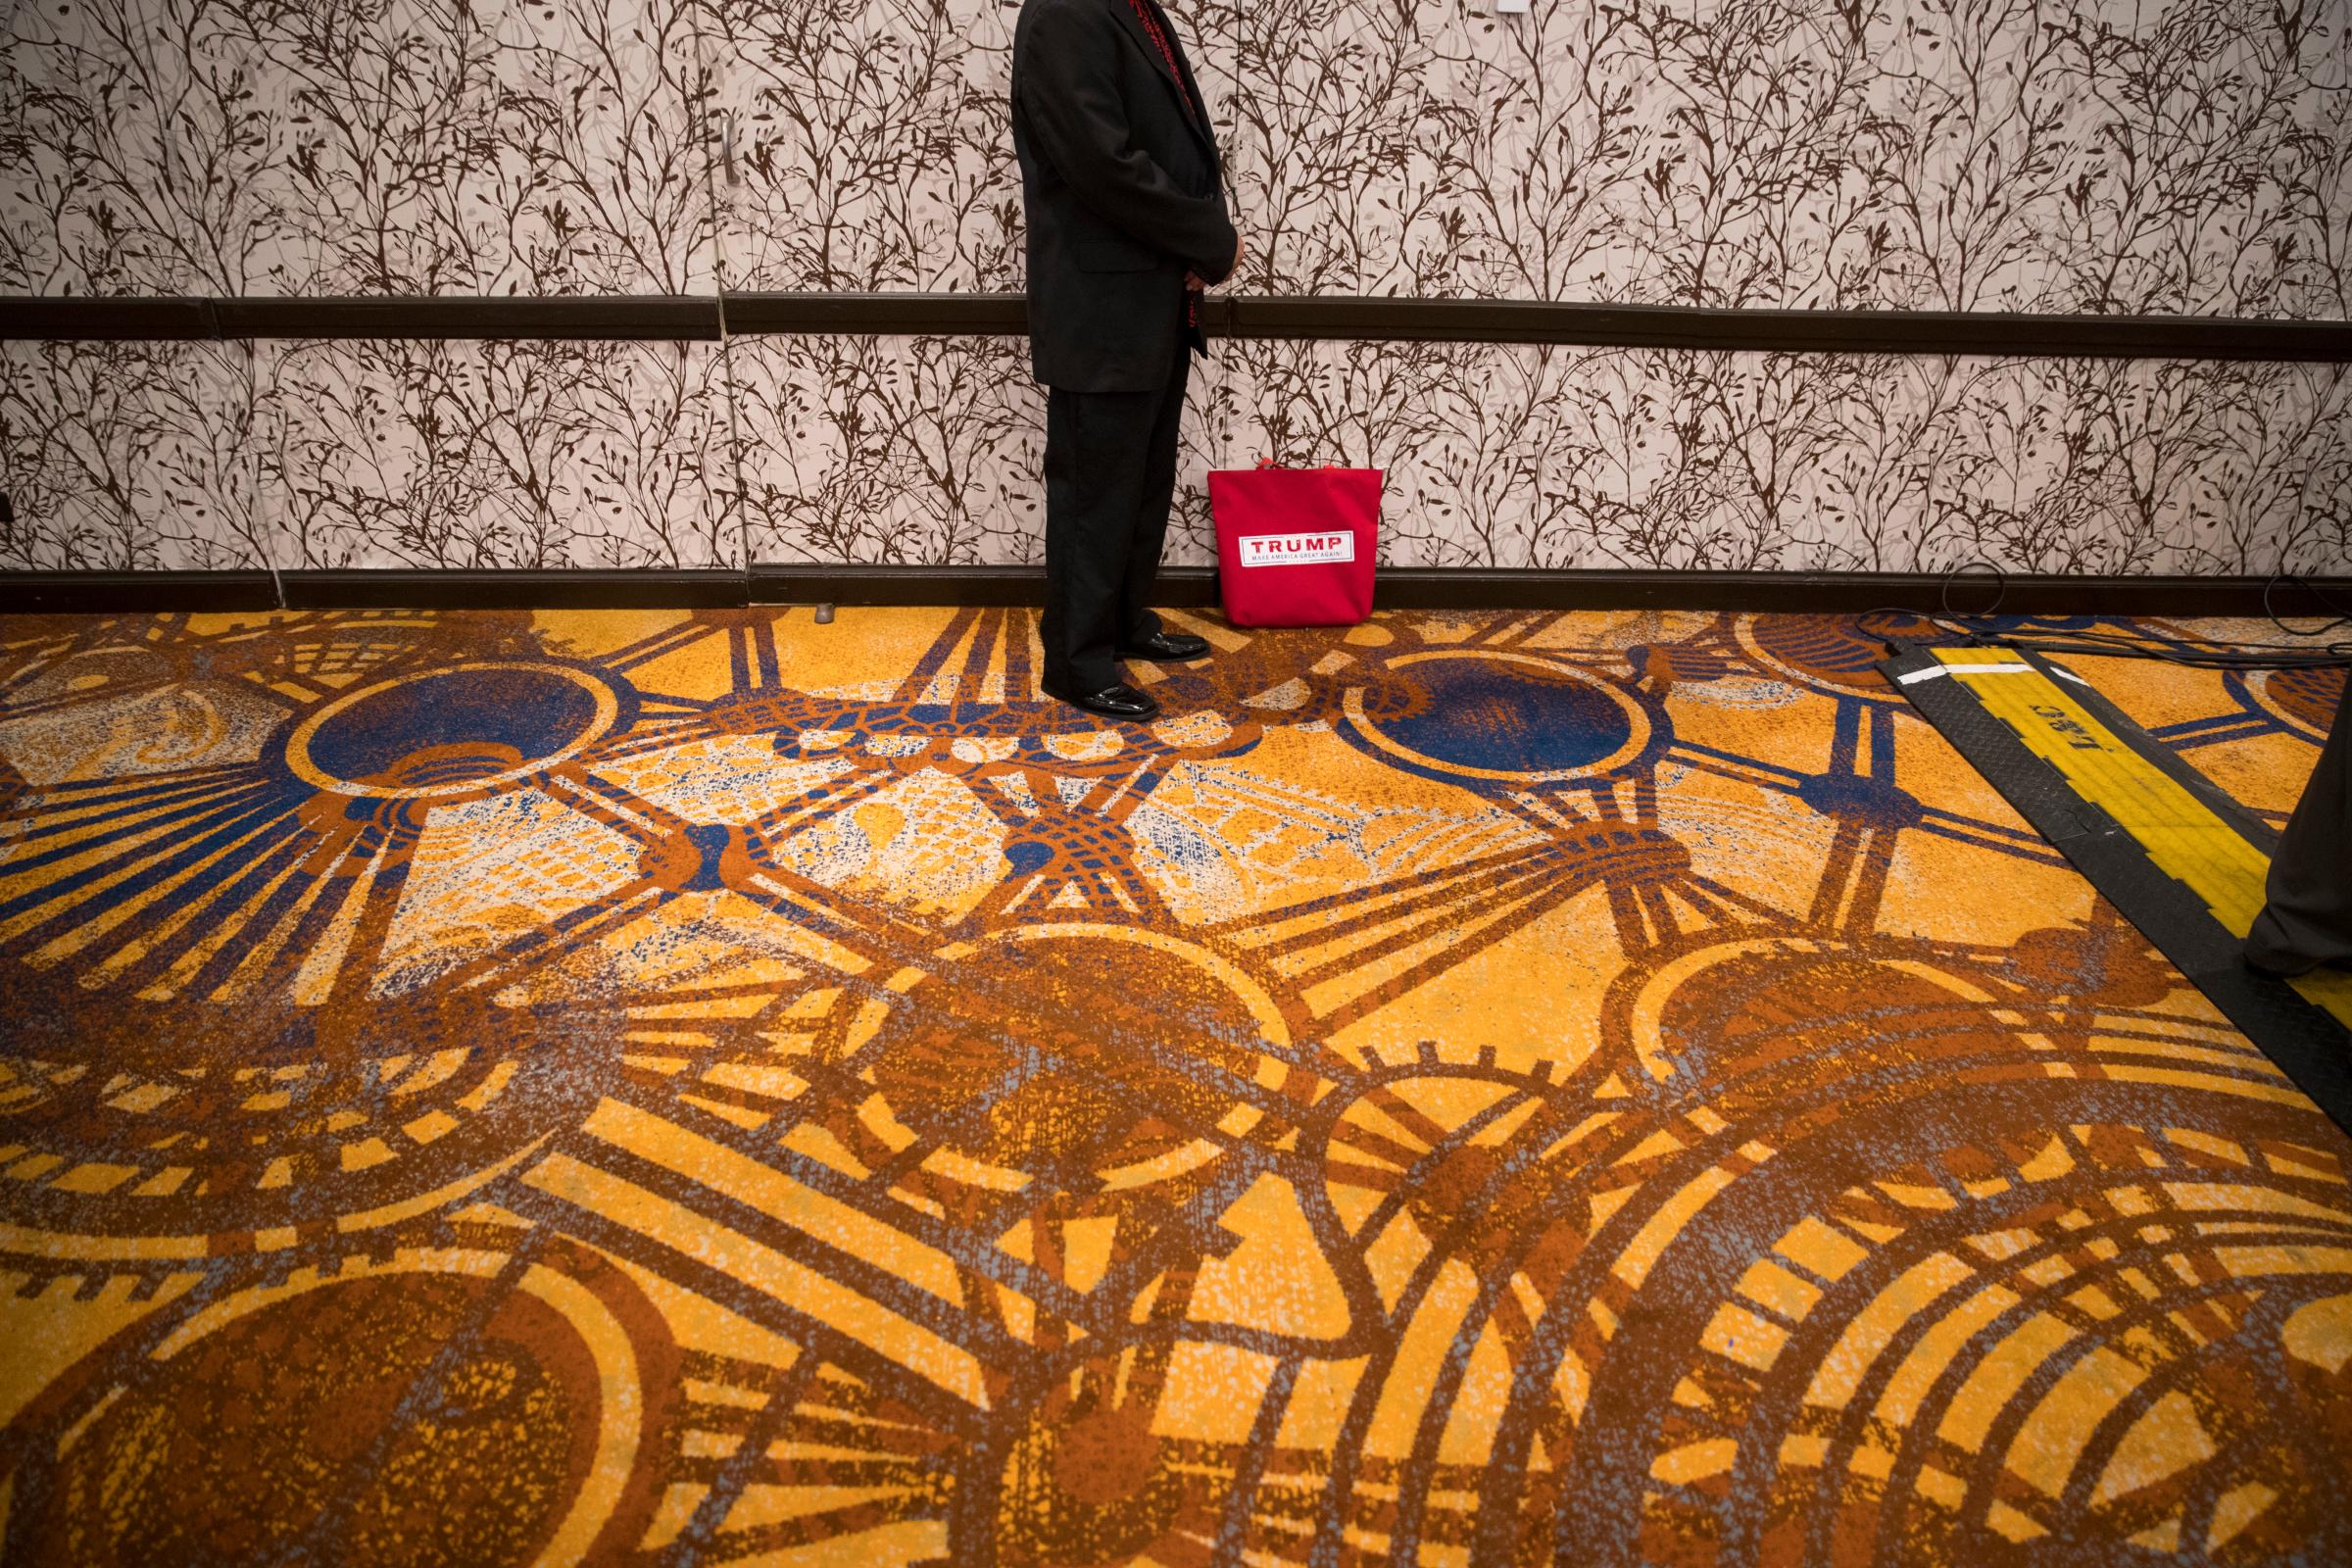 Nathan Paikai, of Honolulu, waits for the arrival of Republican presidential candidate Donald Trump at a reception with friends and family following the Republican National Convention, July 22, 2016, in Cleveland.